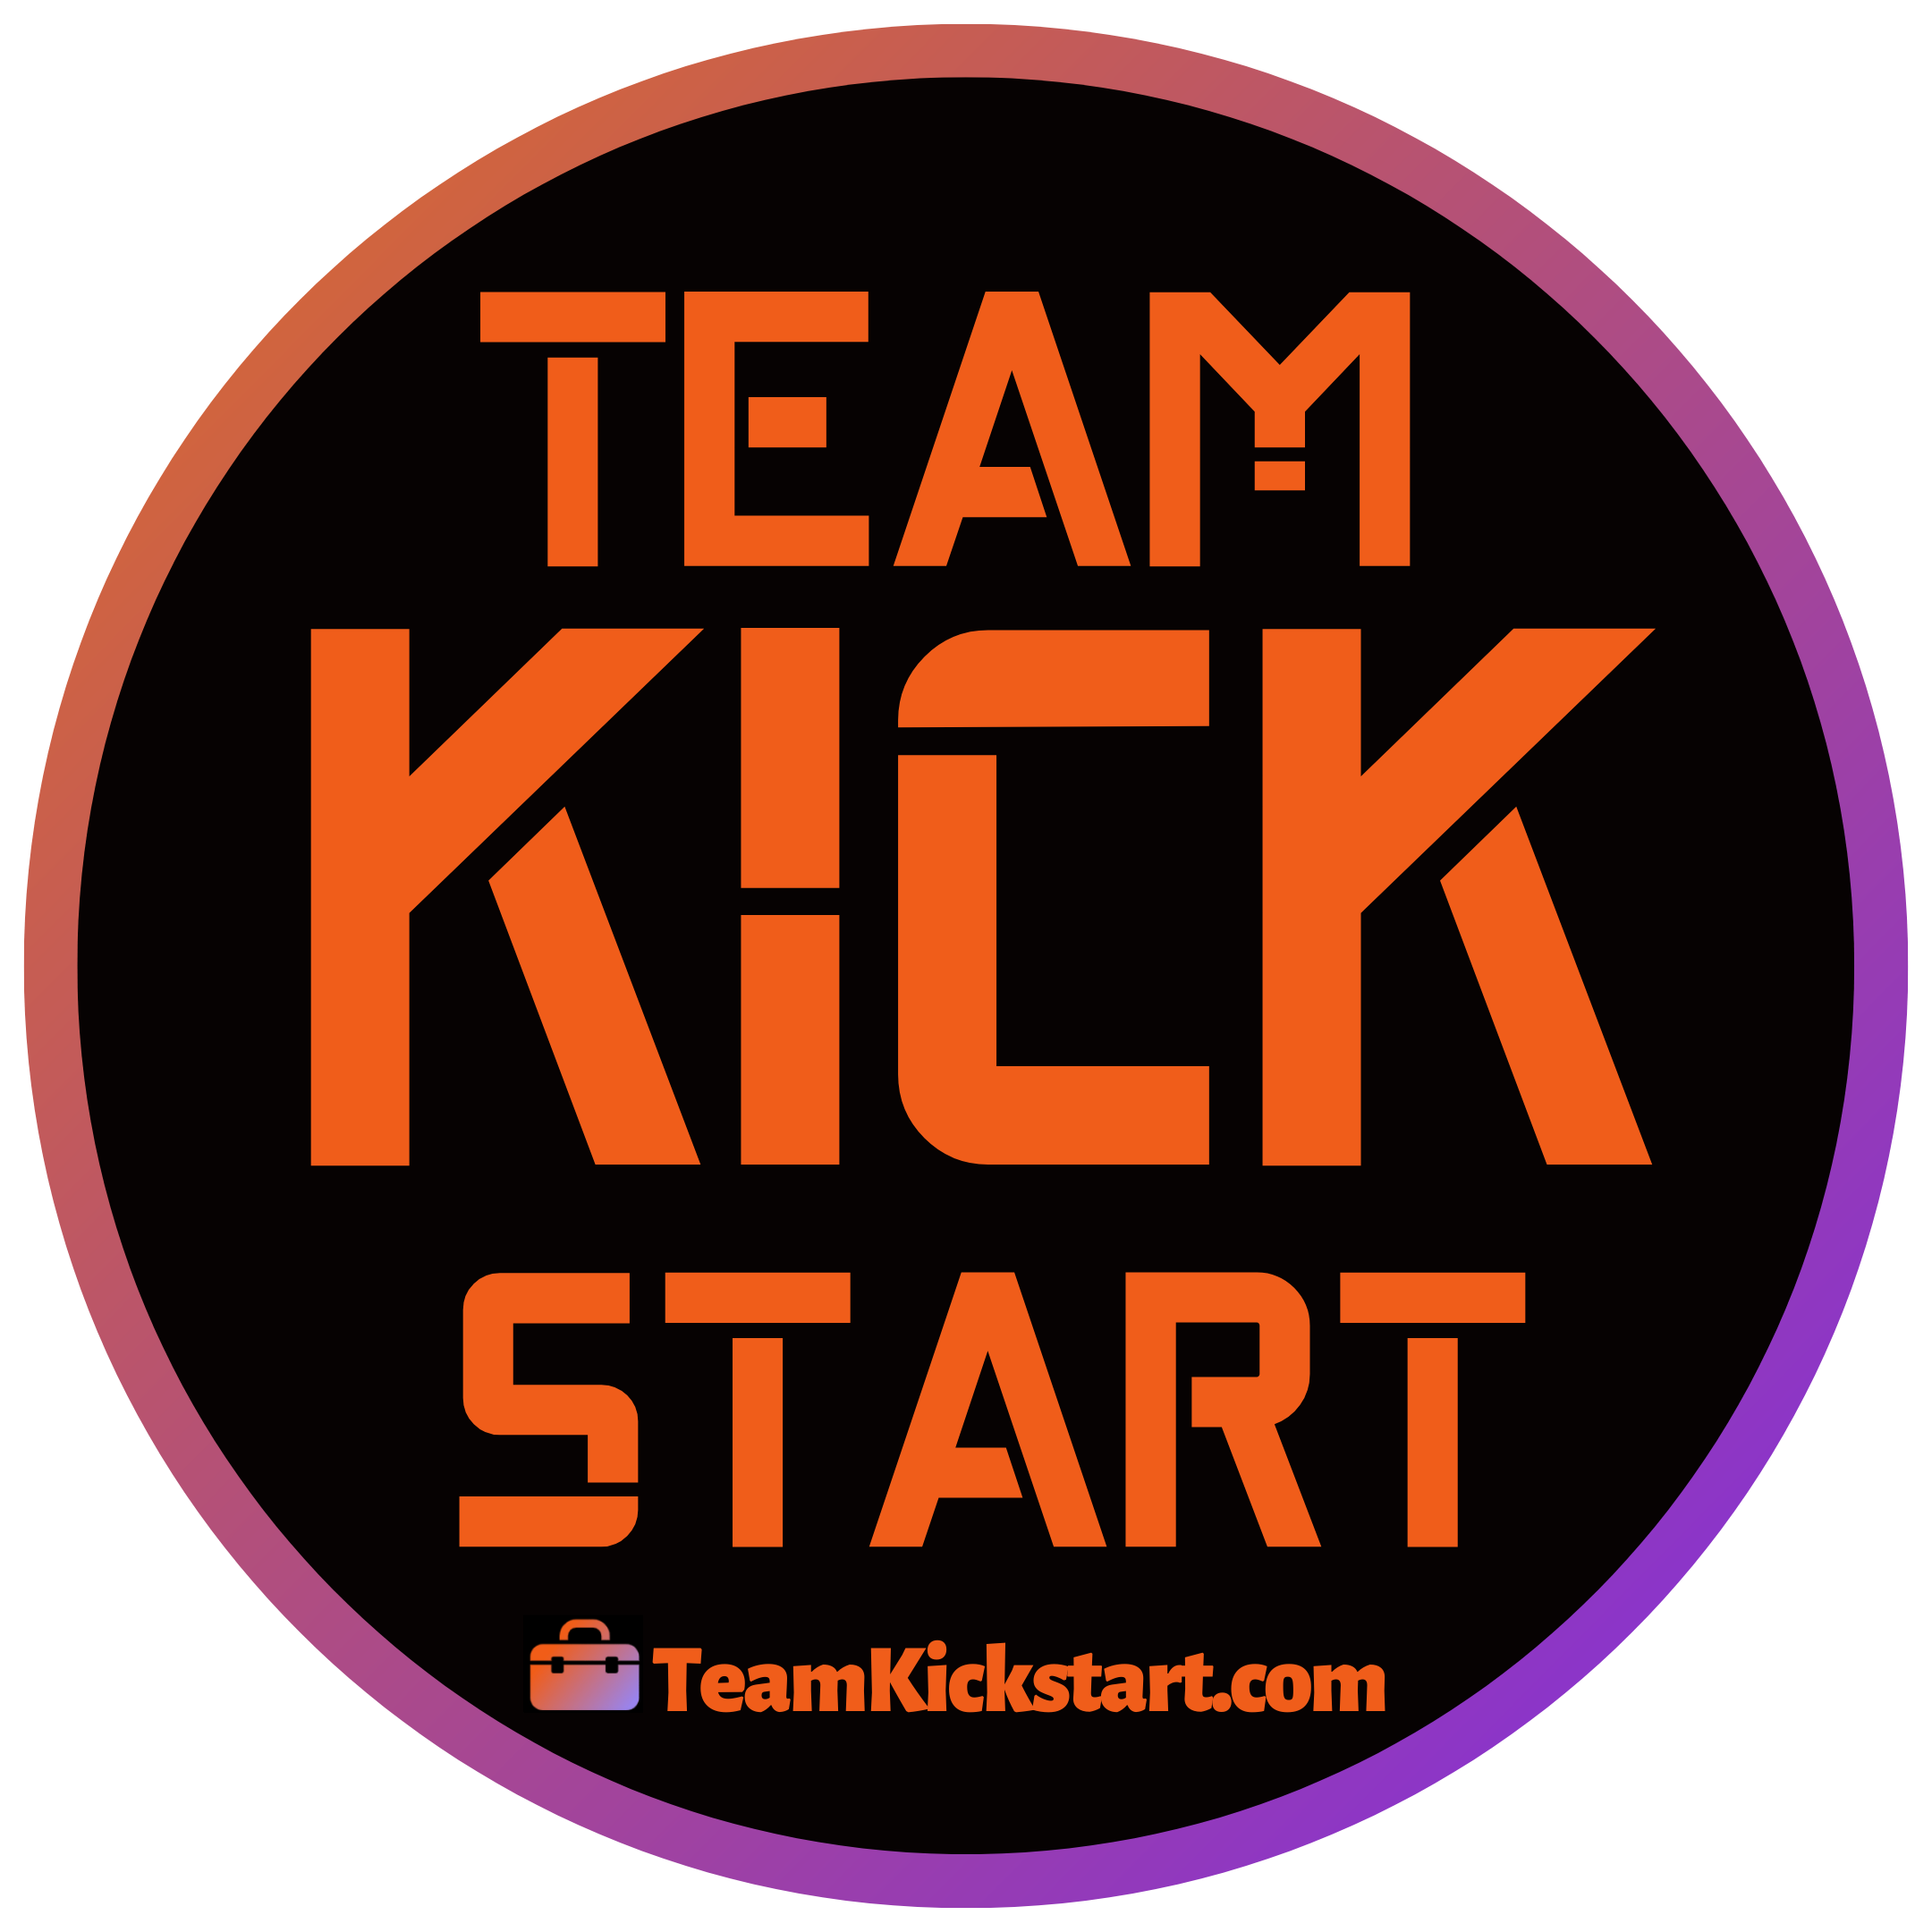 TeamKickstart from US of Softwares and Application